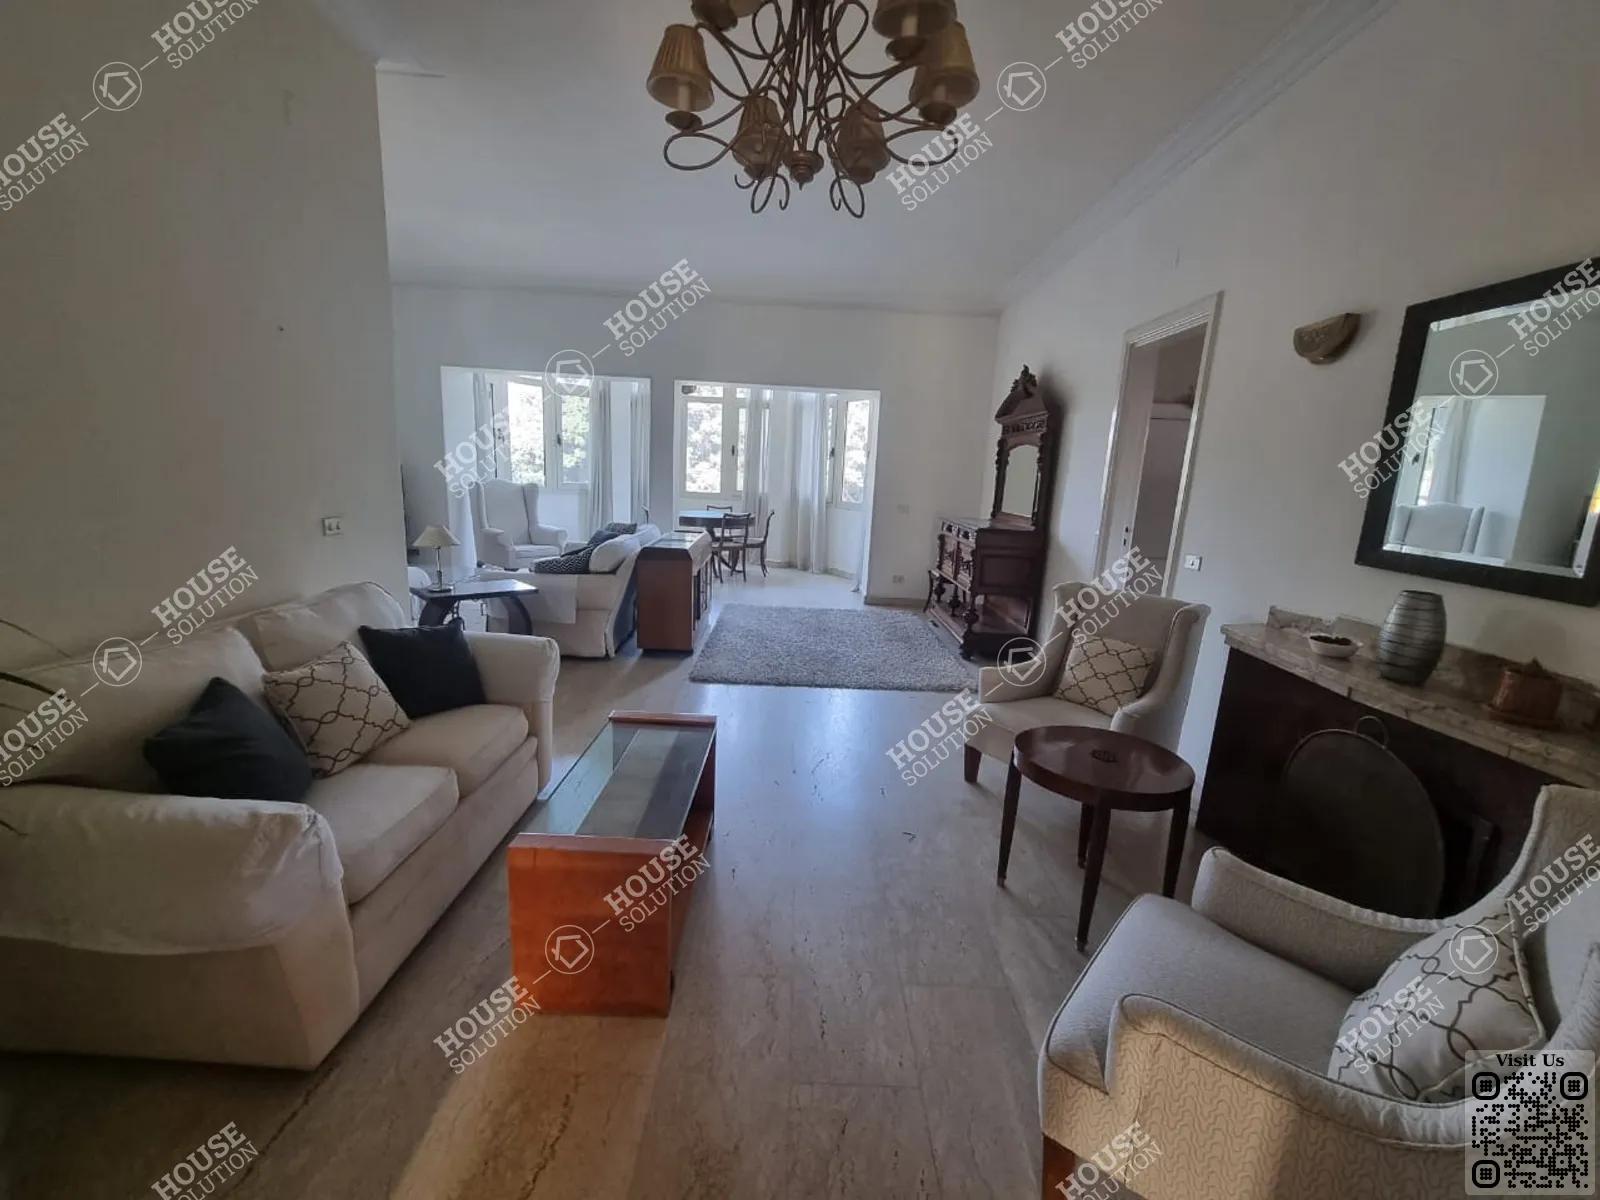 RECEPTION  @ Apartments For Rent In Maadi Maadi Sarayat Area: 150 m² consists of 2 Bedrooms 2 Bathrooms Modern furnished 5 stars #4150-0